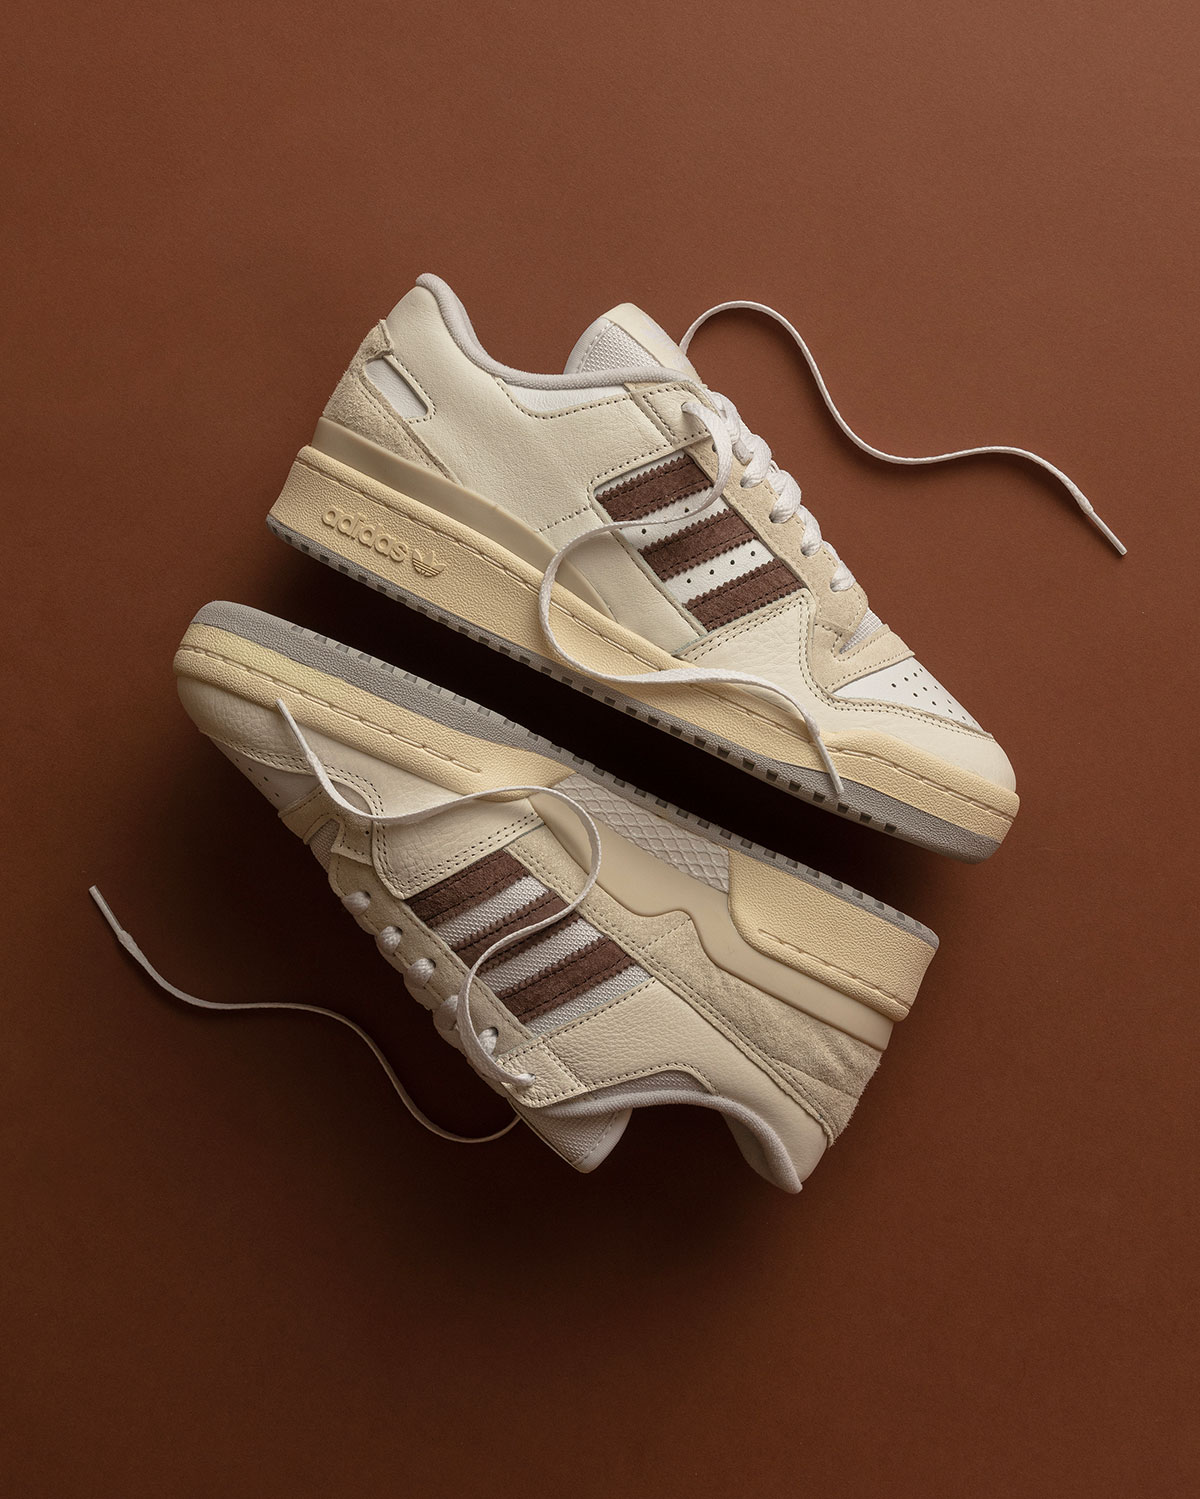 packer-adidas-forum-low-cocoa.jpg